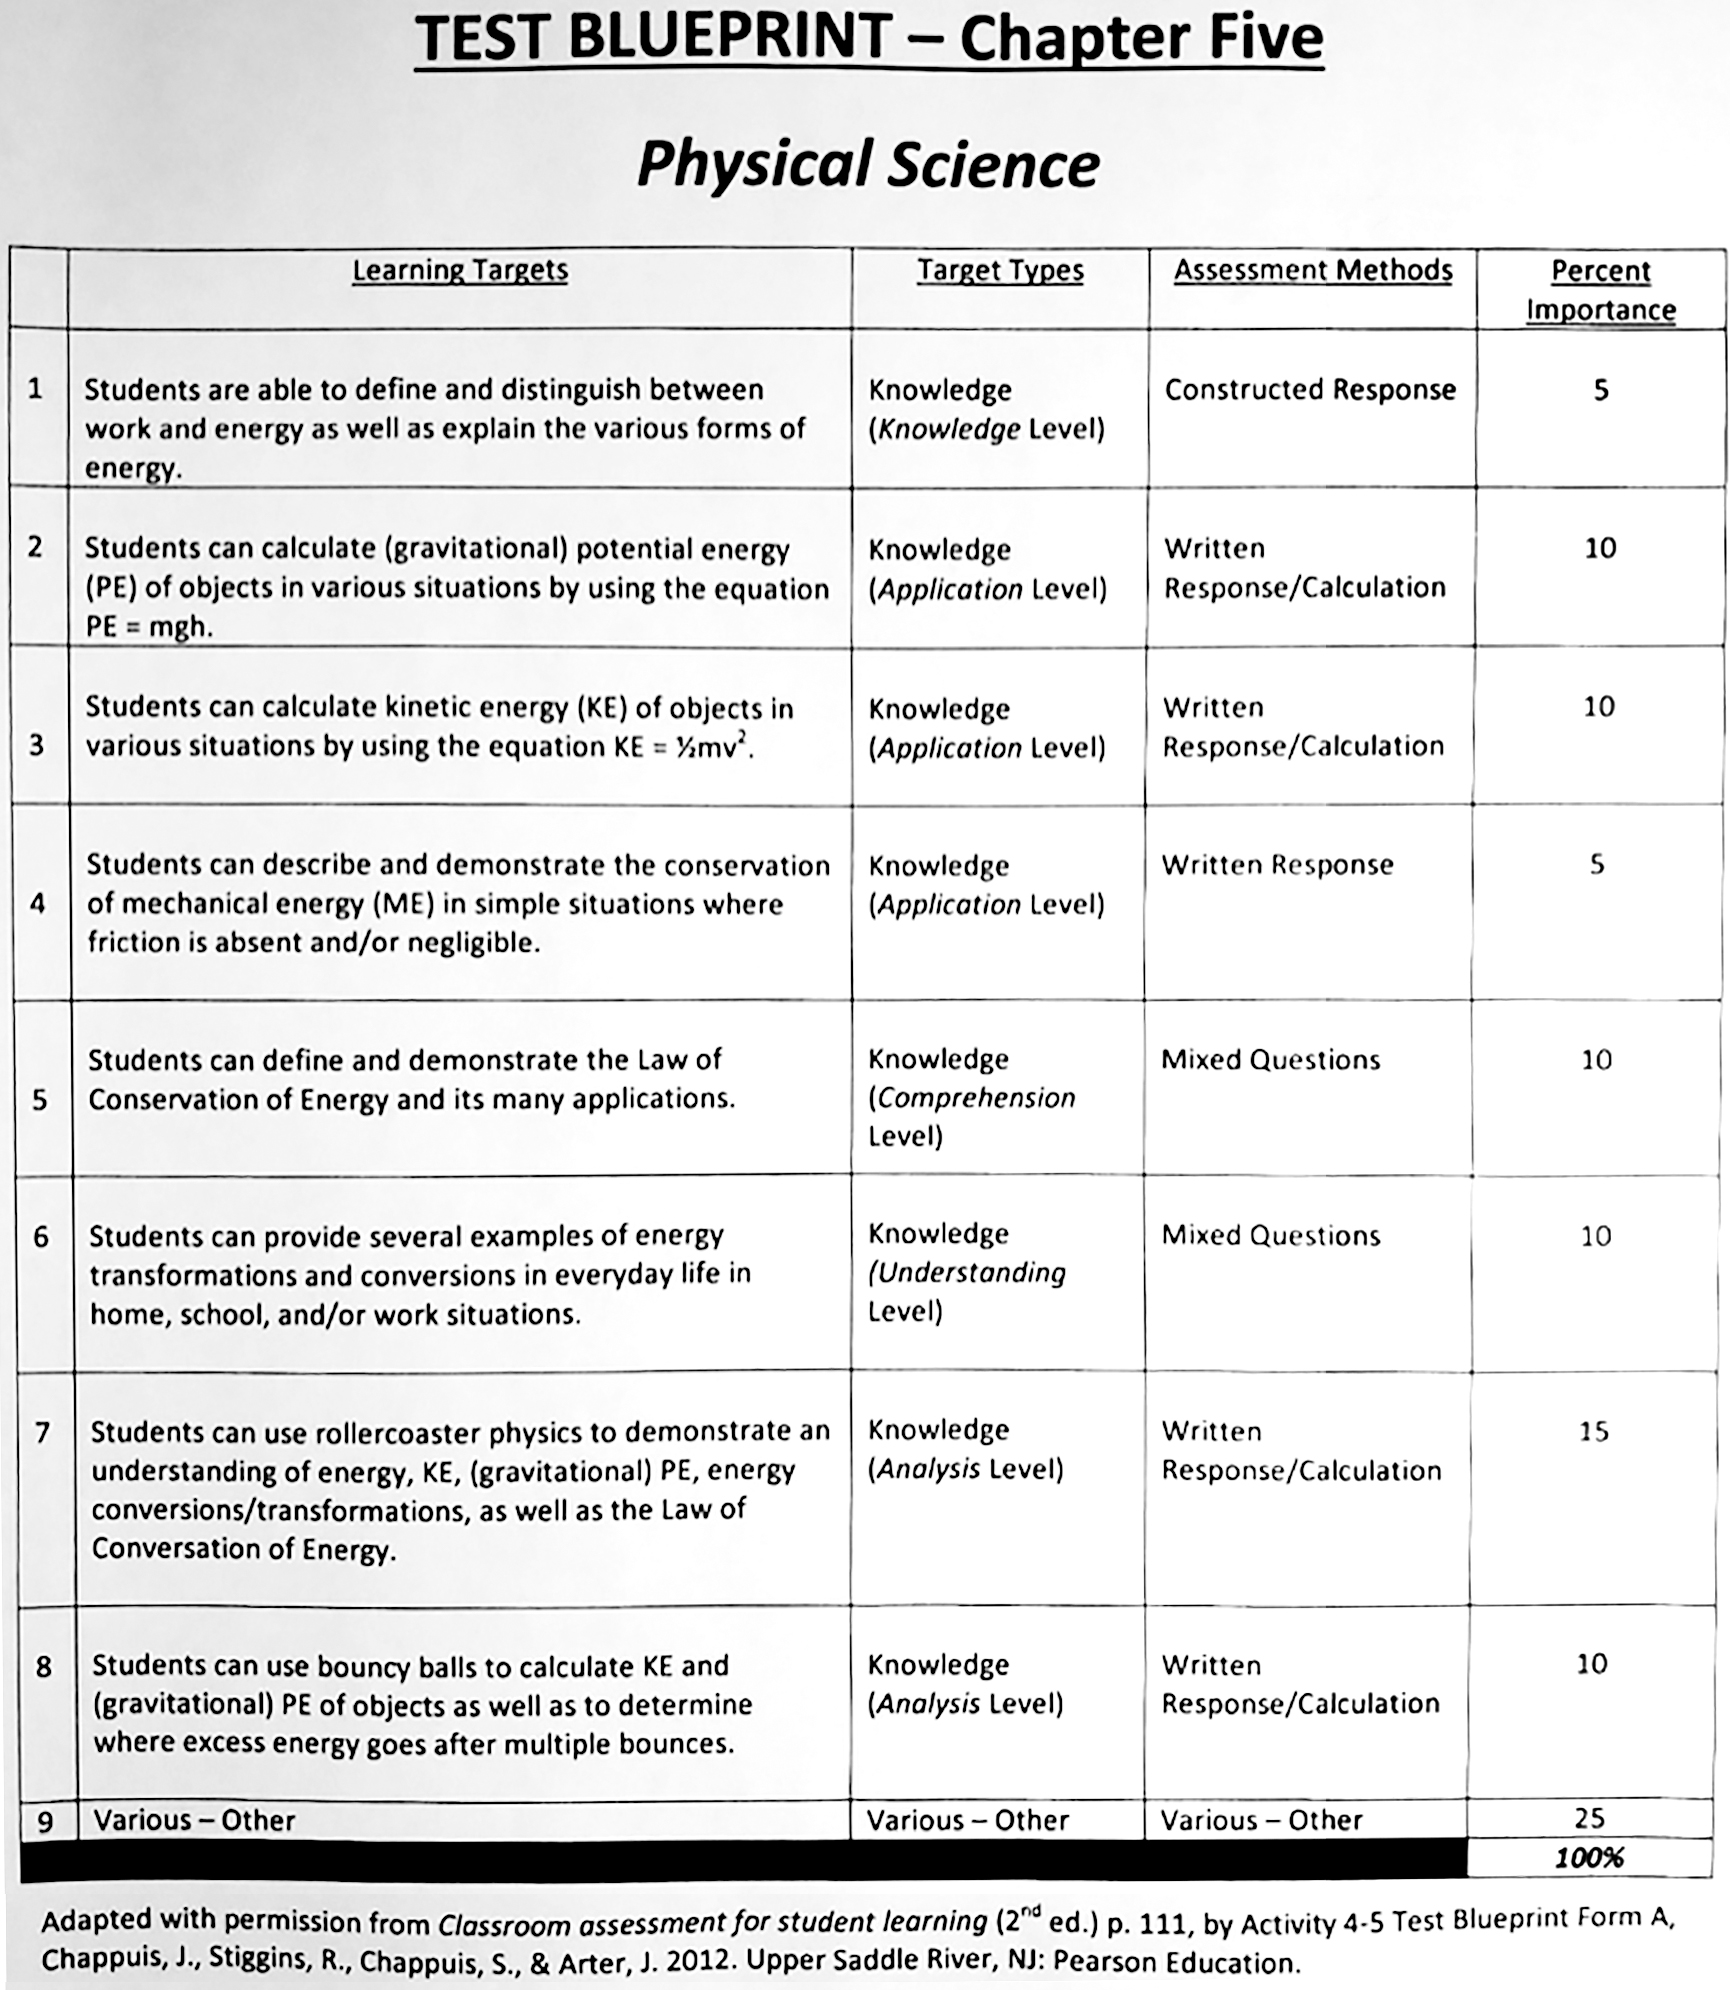 A sample physical science test blueprint for the study of kinetic, potential, and mechanical energy.